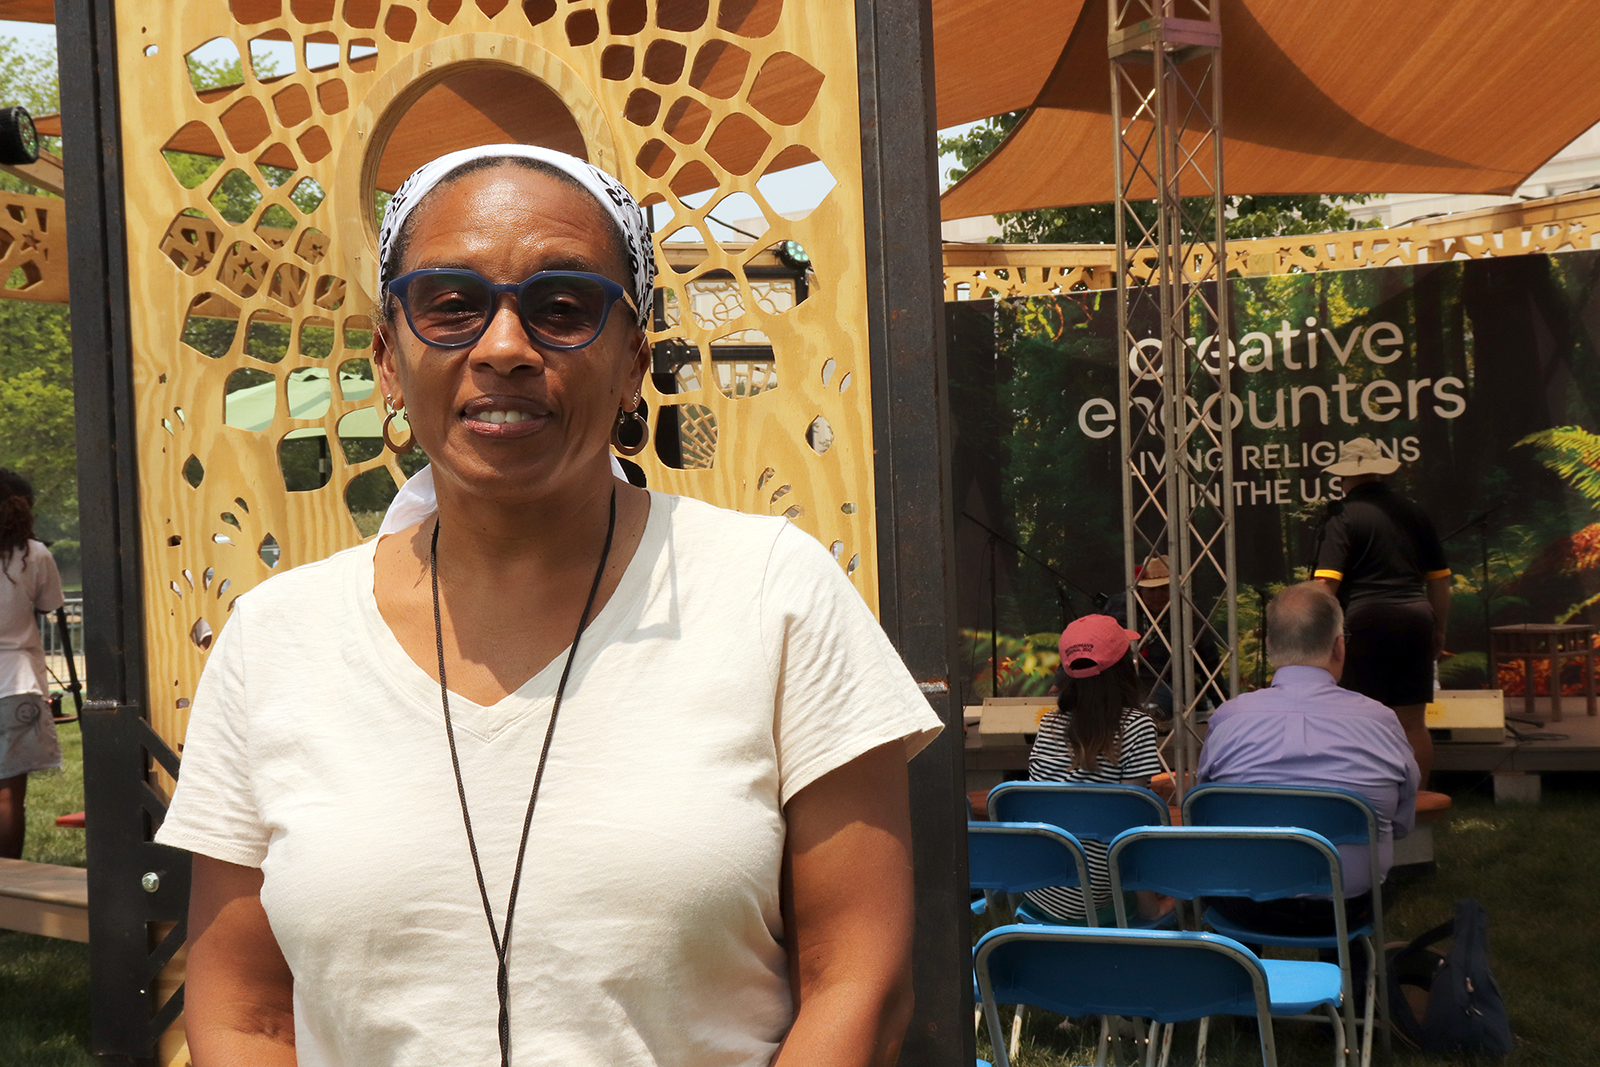 Michelle Banks is lead curator of the “Creative Encounters” program of the Smithsonian Folklife Festival on the National Mall in Washington. RNS photo by Adelle M. Banks